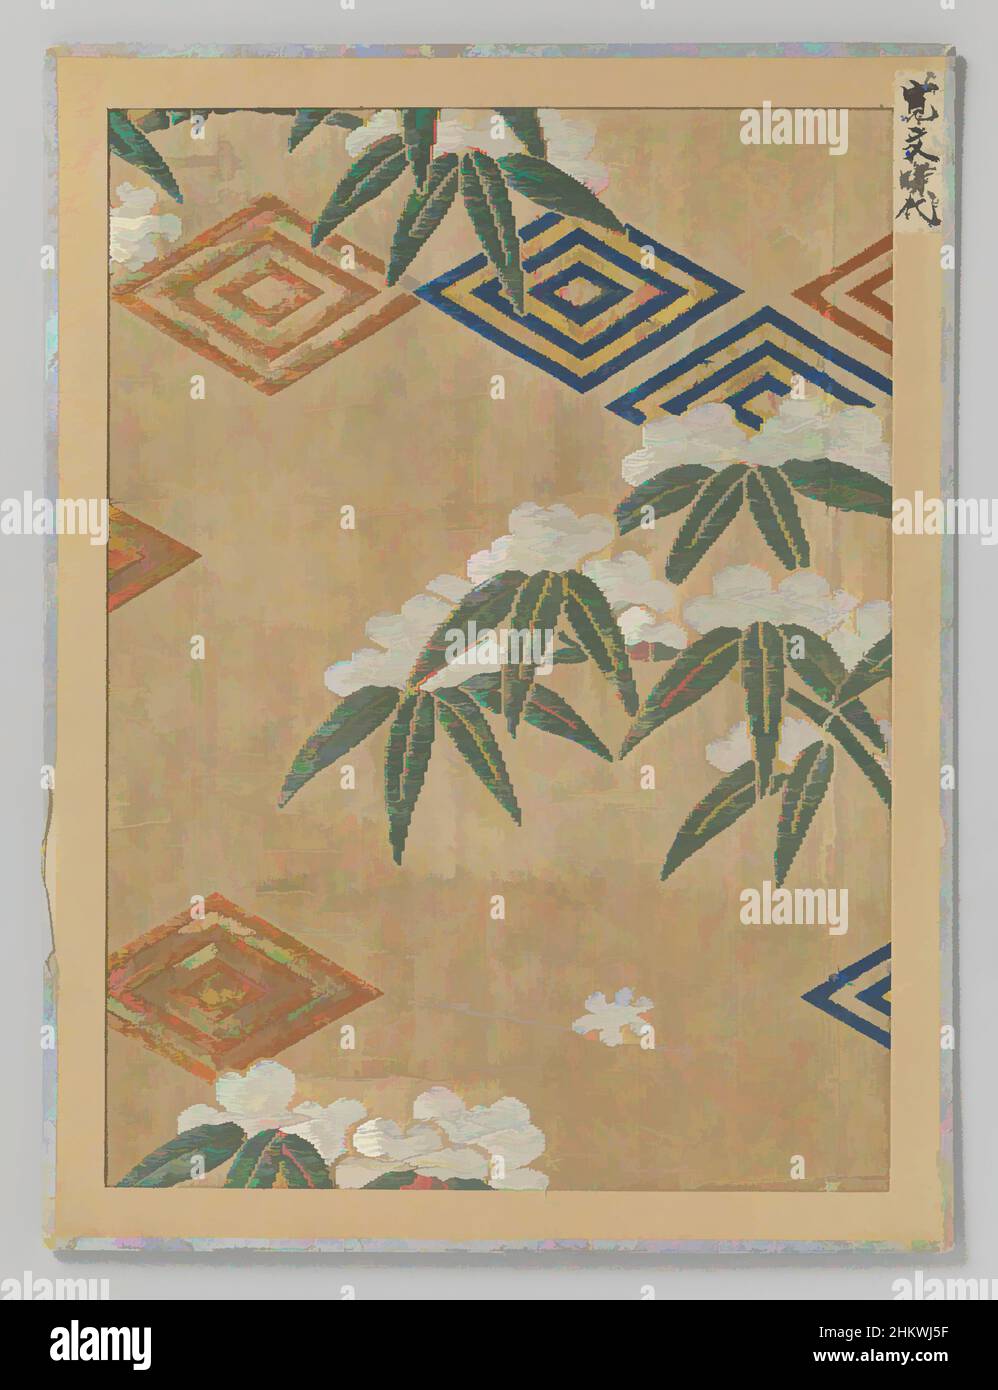 Art inspired by Textile fragment, Textile fragment, embroidery of white oleanders and diamond motifs on ochre silk., Japan, 1661 - 1673, silk, height 30.5 cm × width 22 cm, Classic works modernized by Artotop with a splash of modernity. Shapes, color and value, eye-catching visual impact on art. Emotions through freedom of artworks in a contemporary way. A timeless message pursuing a wildly creative new direction. Artists turning to the digital medium and creating the Artotop NFT Stock Photo